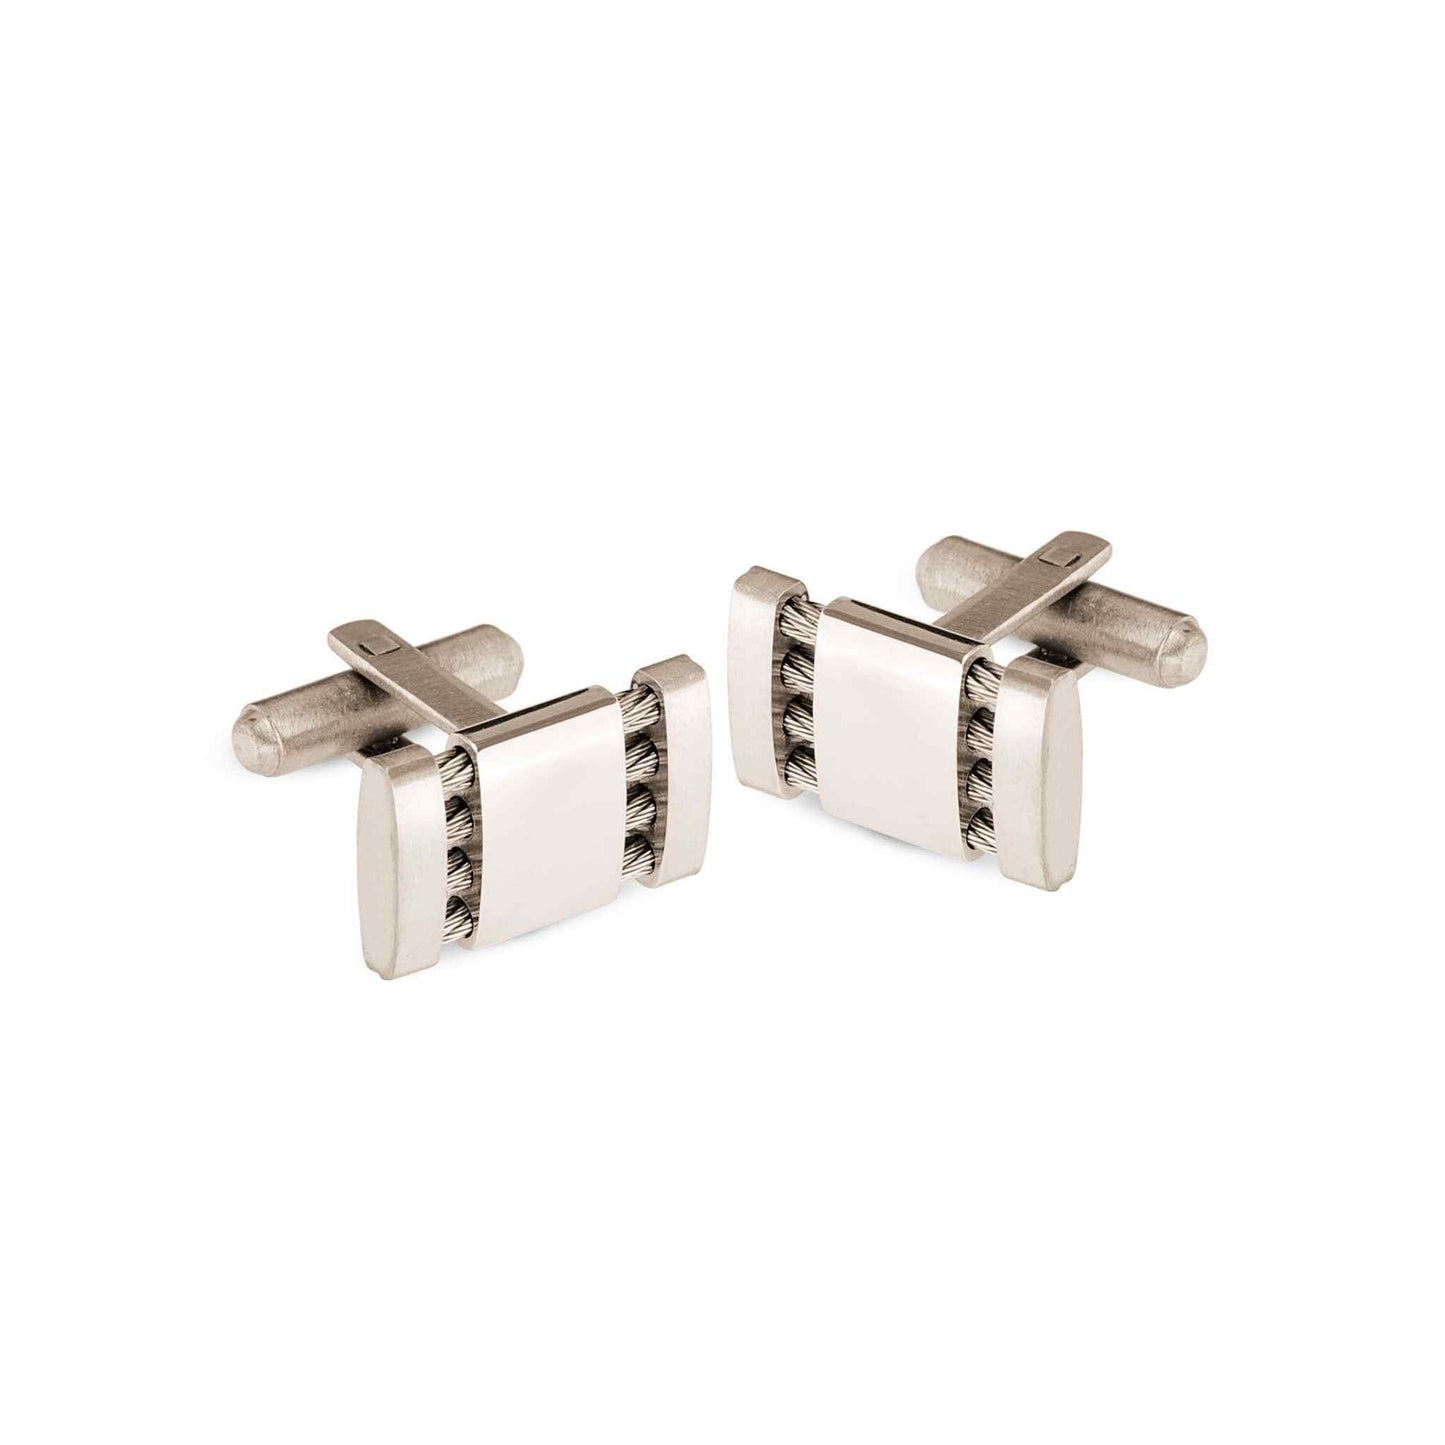 A stainless steel cufflinks with cable displayed on a neutral white background.